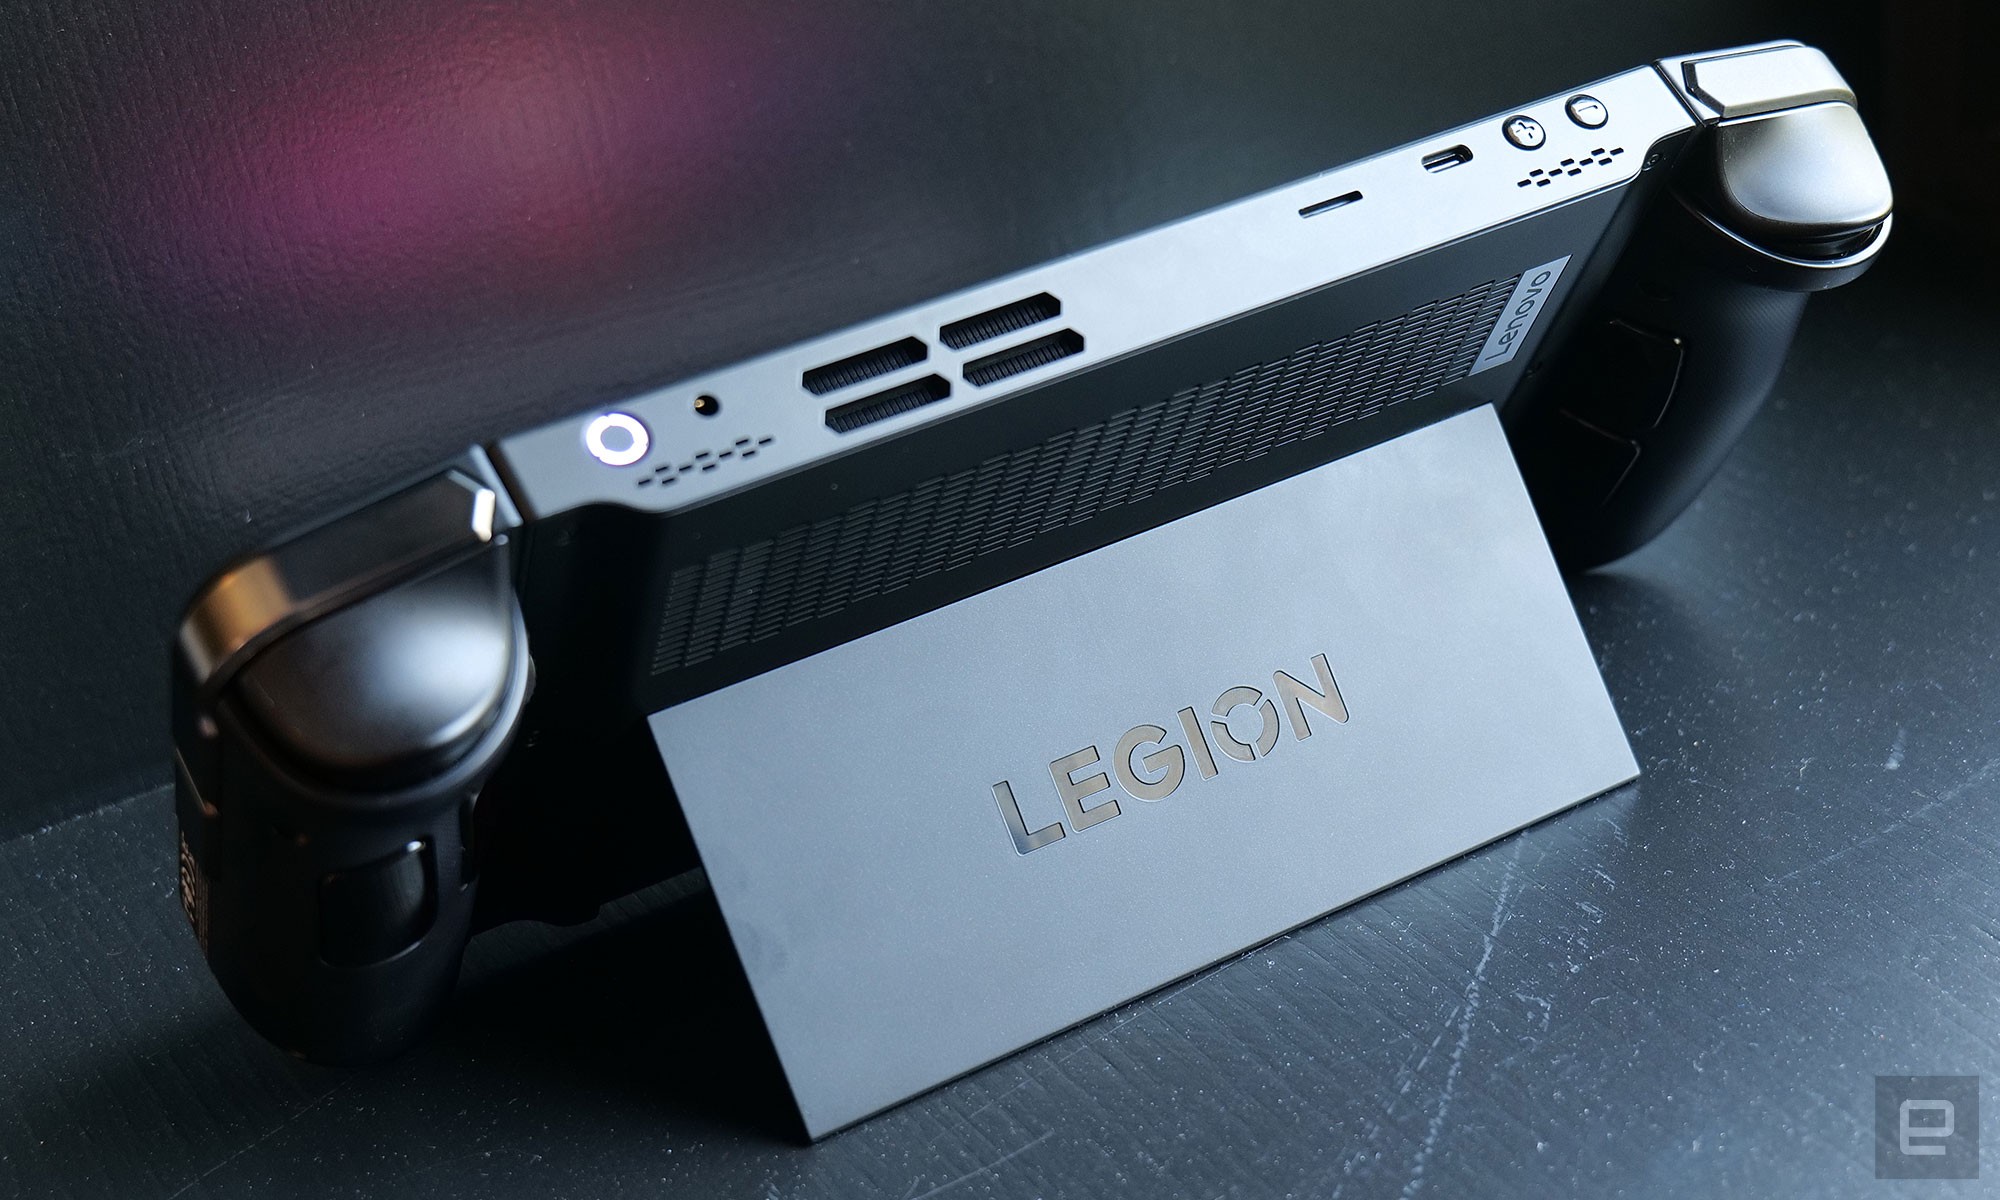 <p>Hands-on photos of the upcoming Lenovo Legion Go handheld gaming PC, which is slated to officially go on sale sometime in October 2023.</p>
